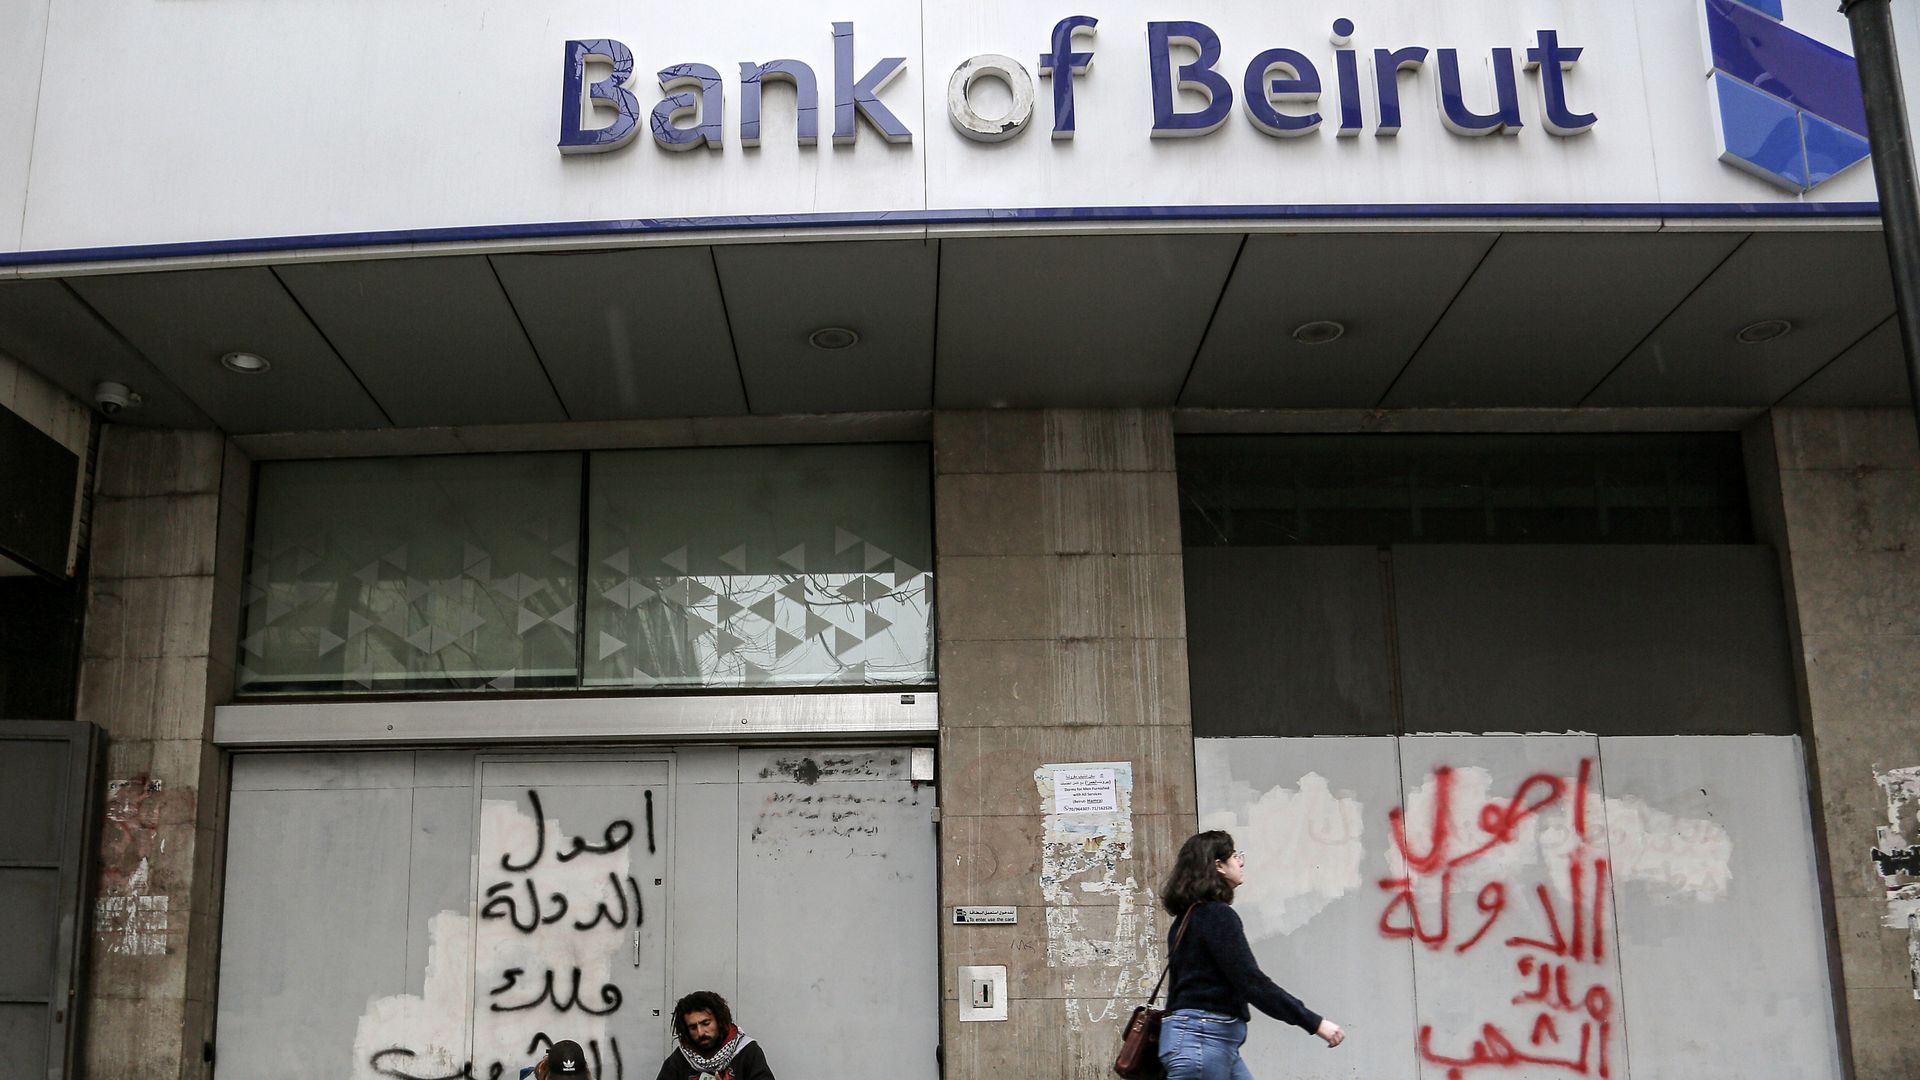  A Lebanese couple sits outside a closed fortified local bank branch in Beirut on March 14. Photo: Marwan Naamani/picture alliance via Getty Images